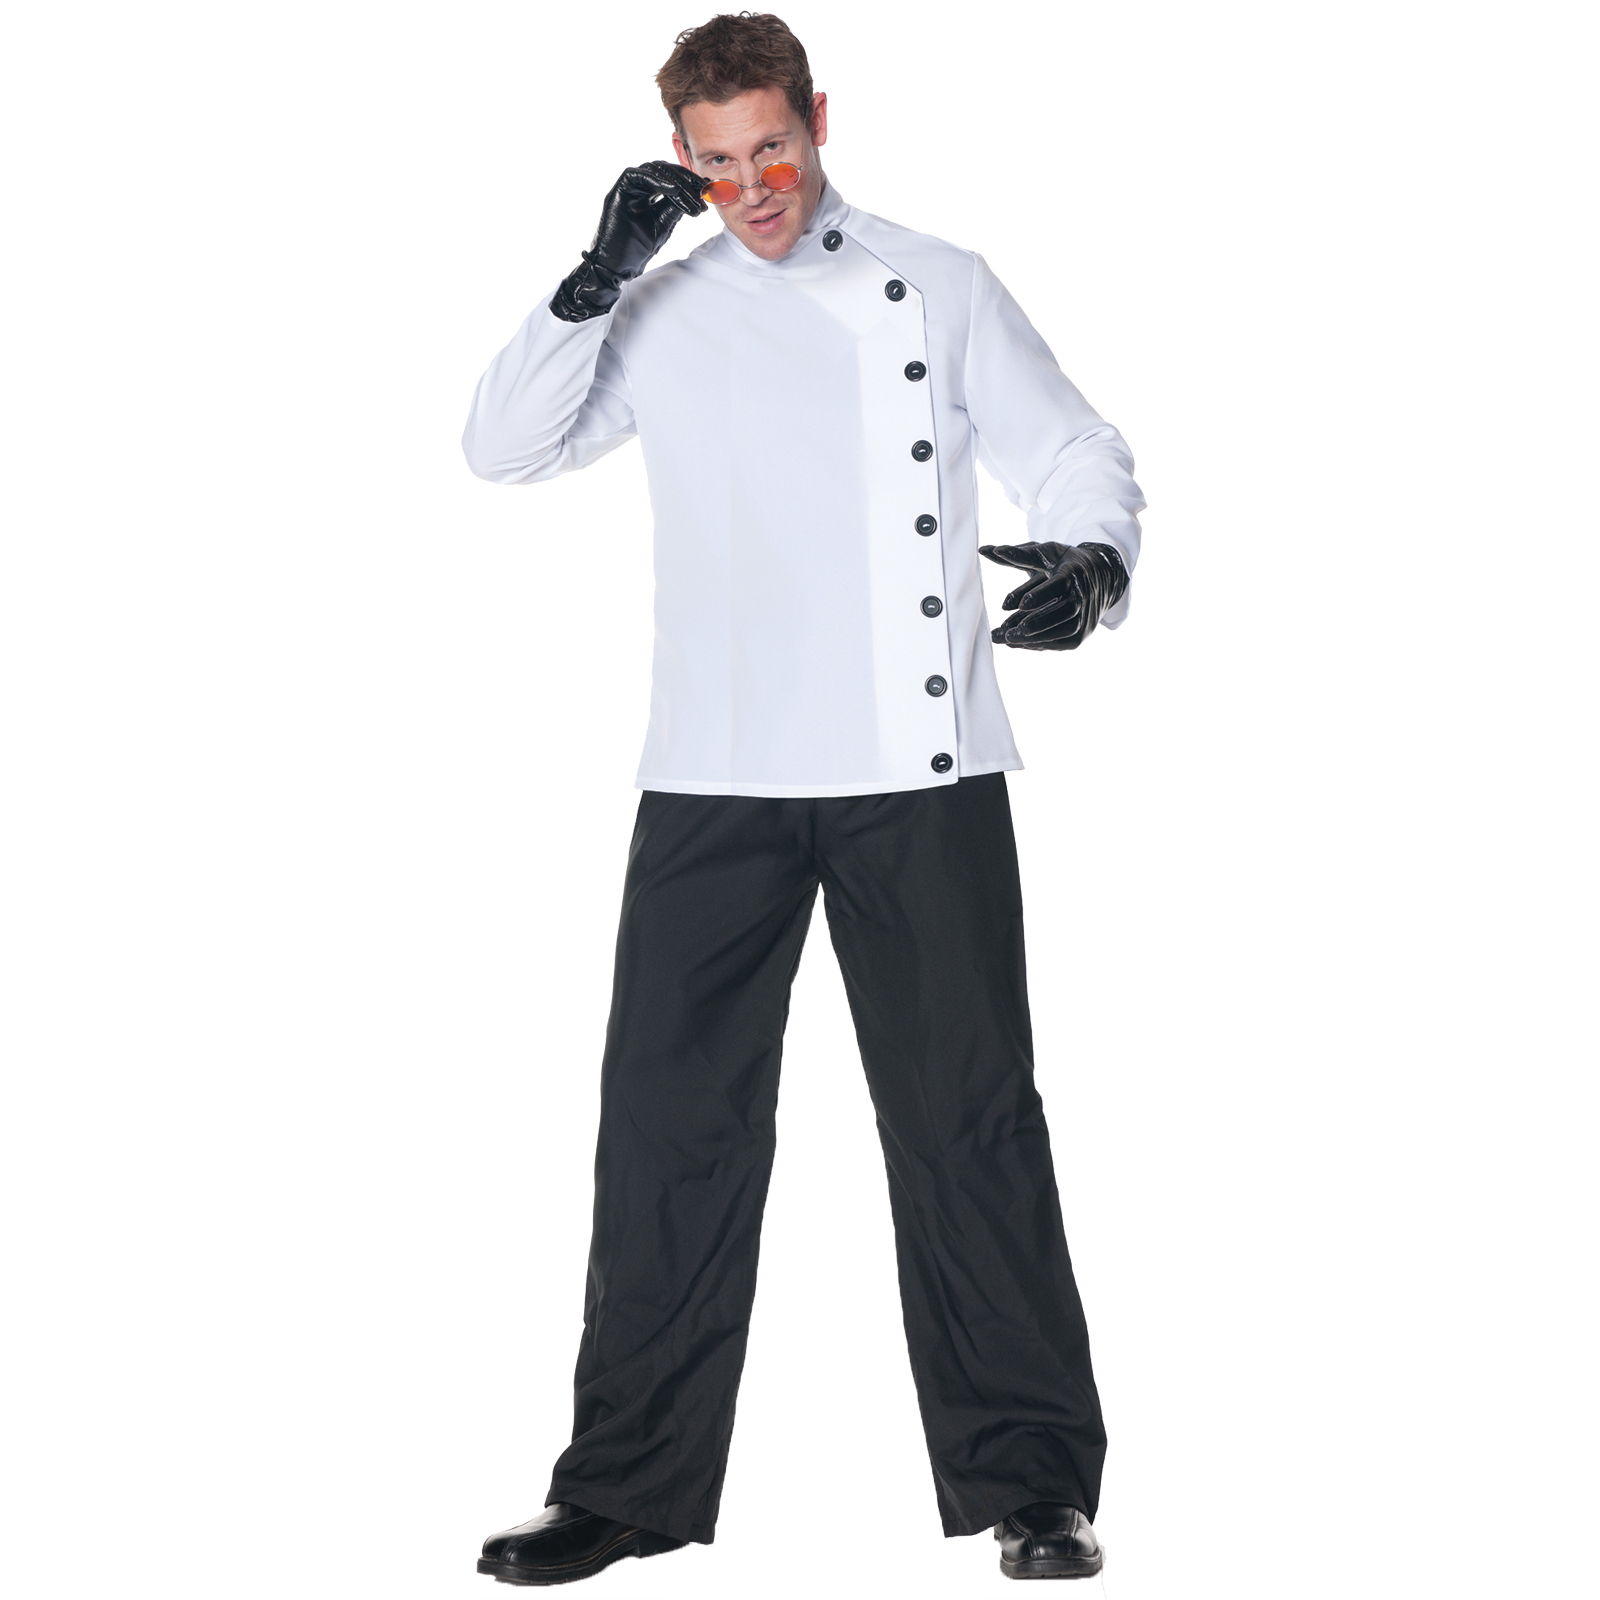 Mad Scientist Shirt Costume Size: One Size Fits Most